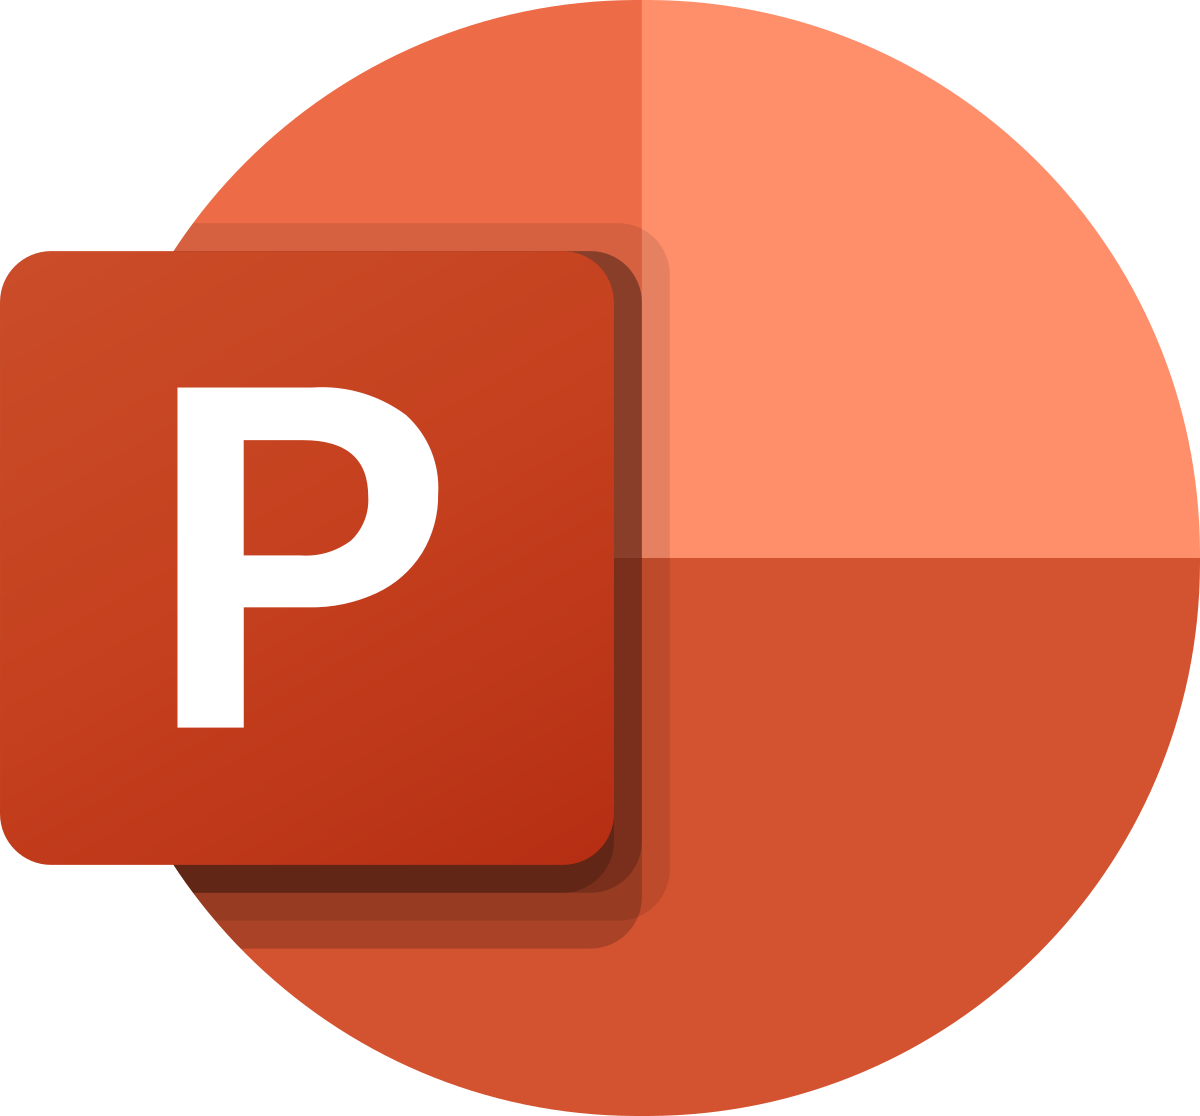 Microsoft_Office_PowerPoint_2019–present.svg.png